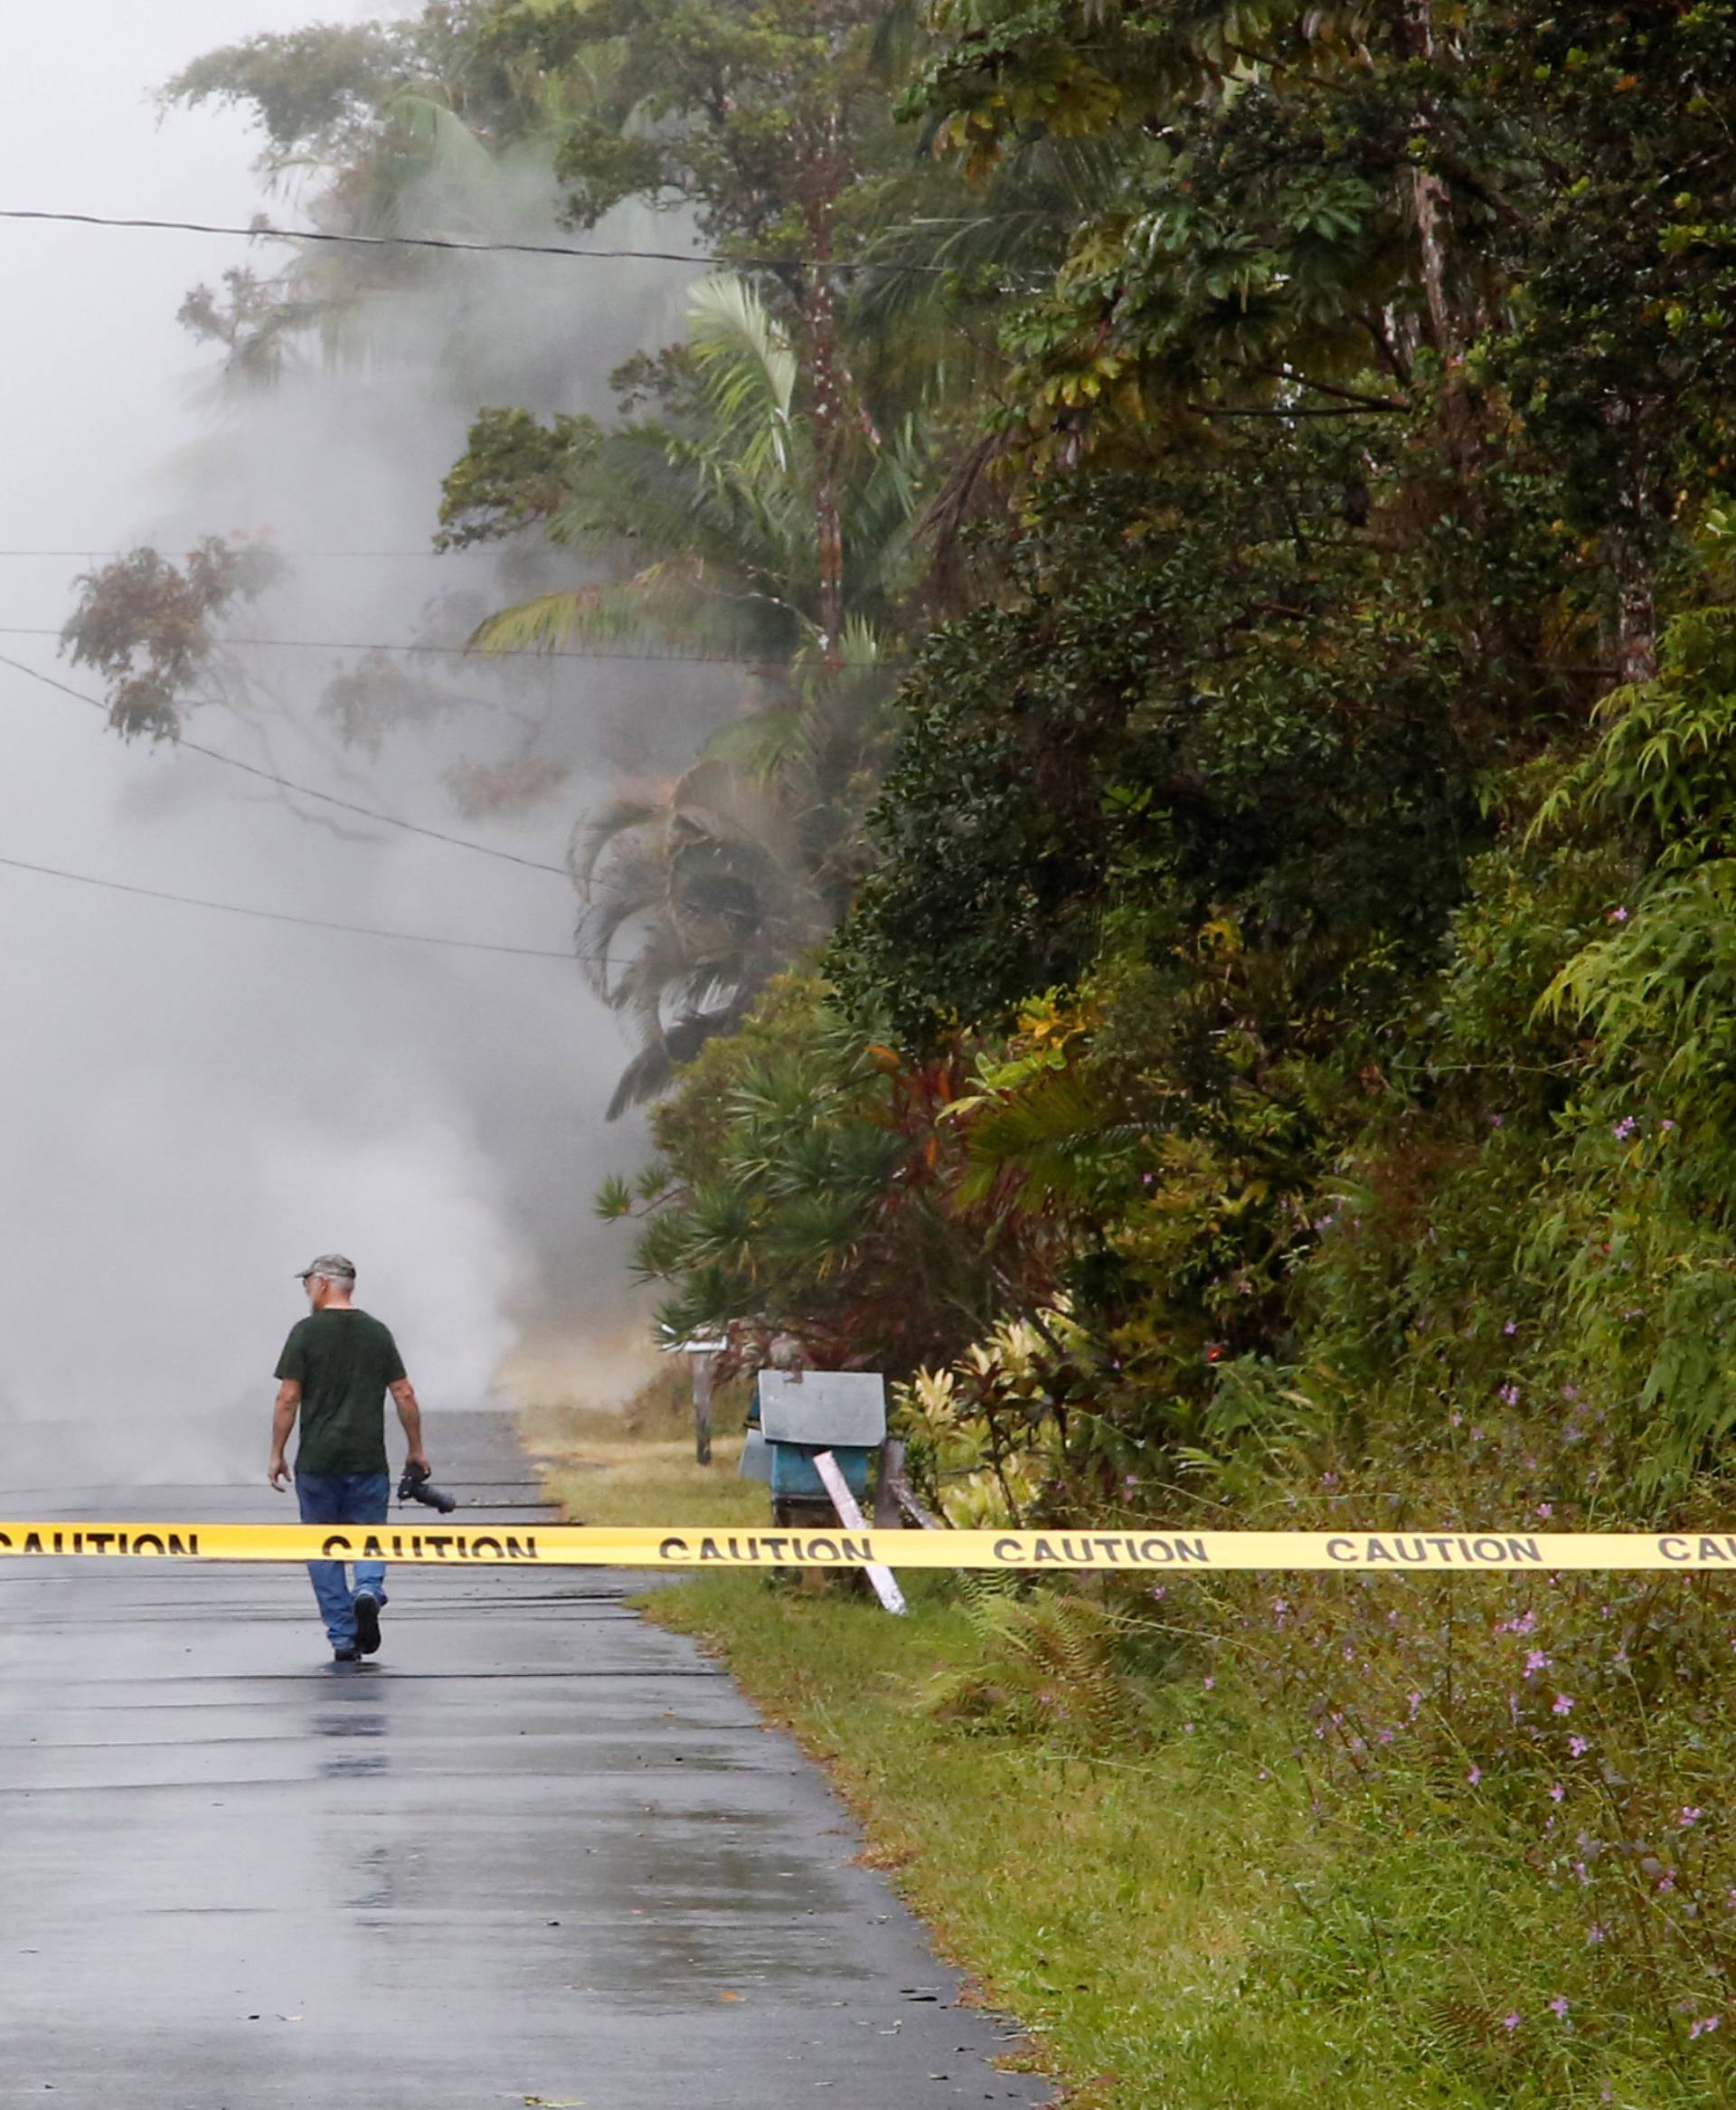 Leilani Estates resident Delance Weigel, 71, walks toward steam and sulfur dioxide gas emerging from a crack in the ground near his home during ongoing eruptions of the Kilauea Volcano